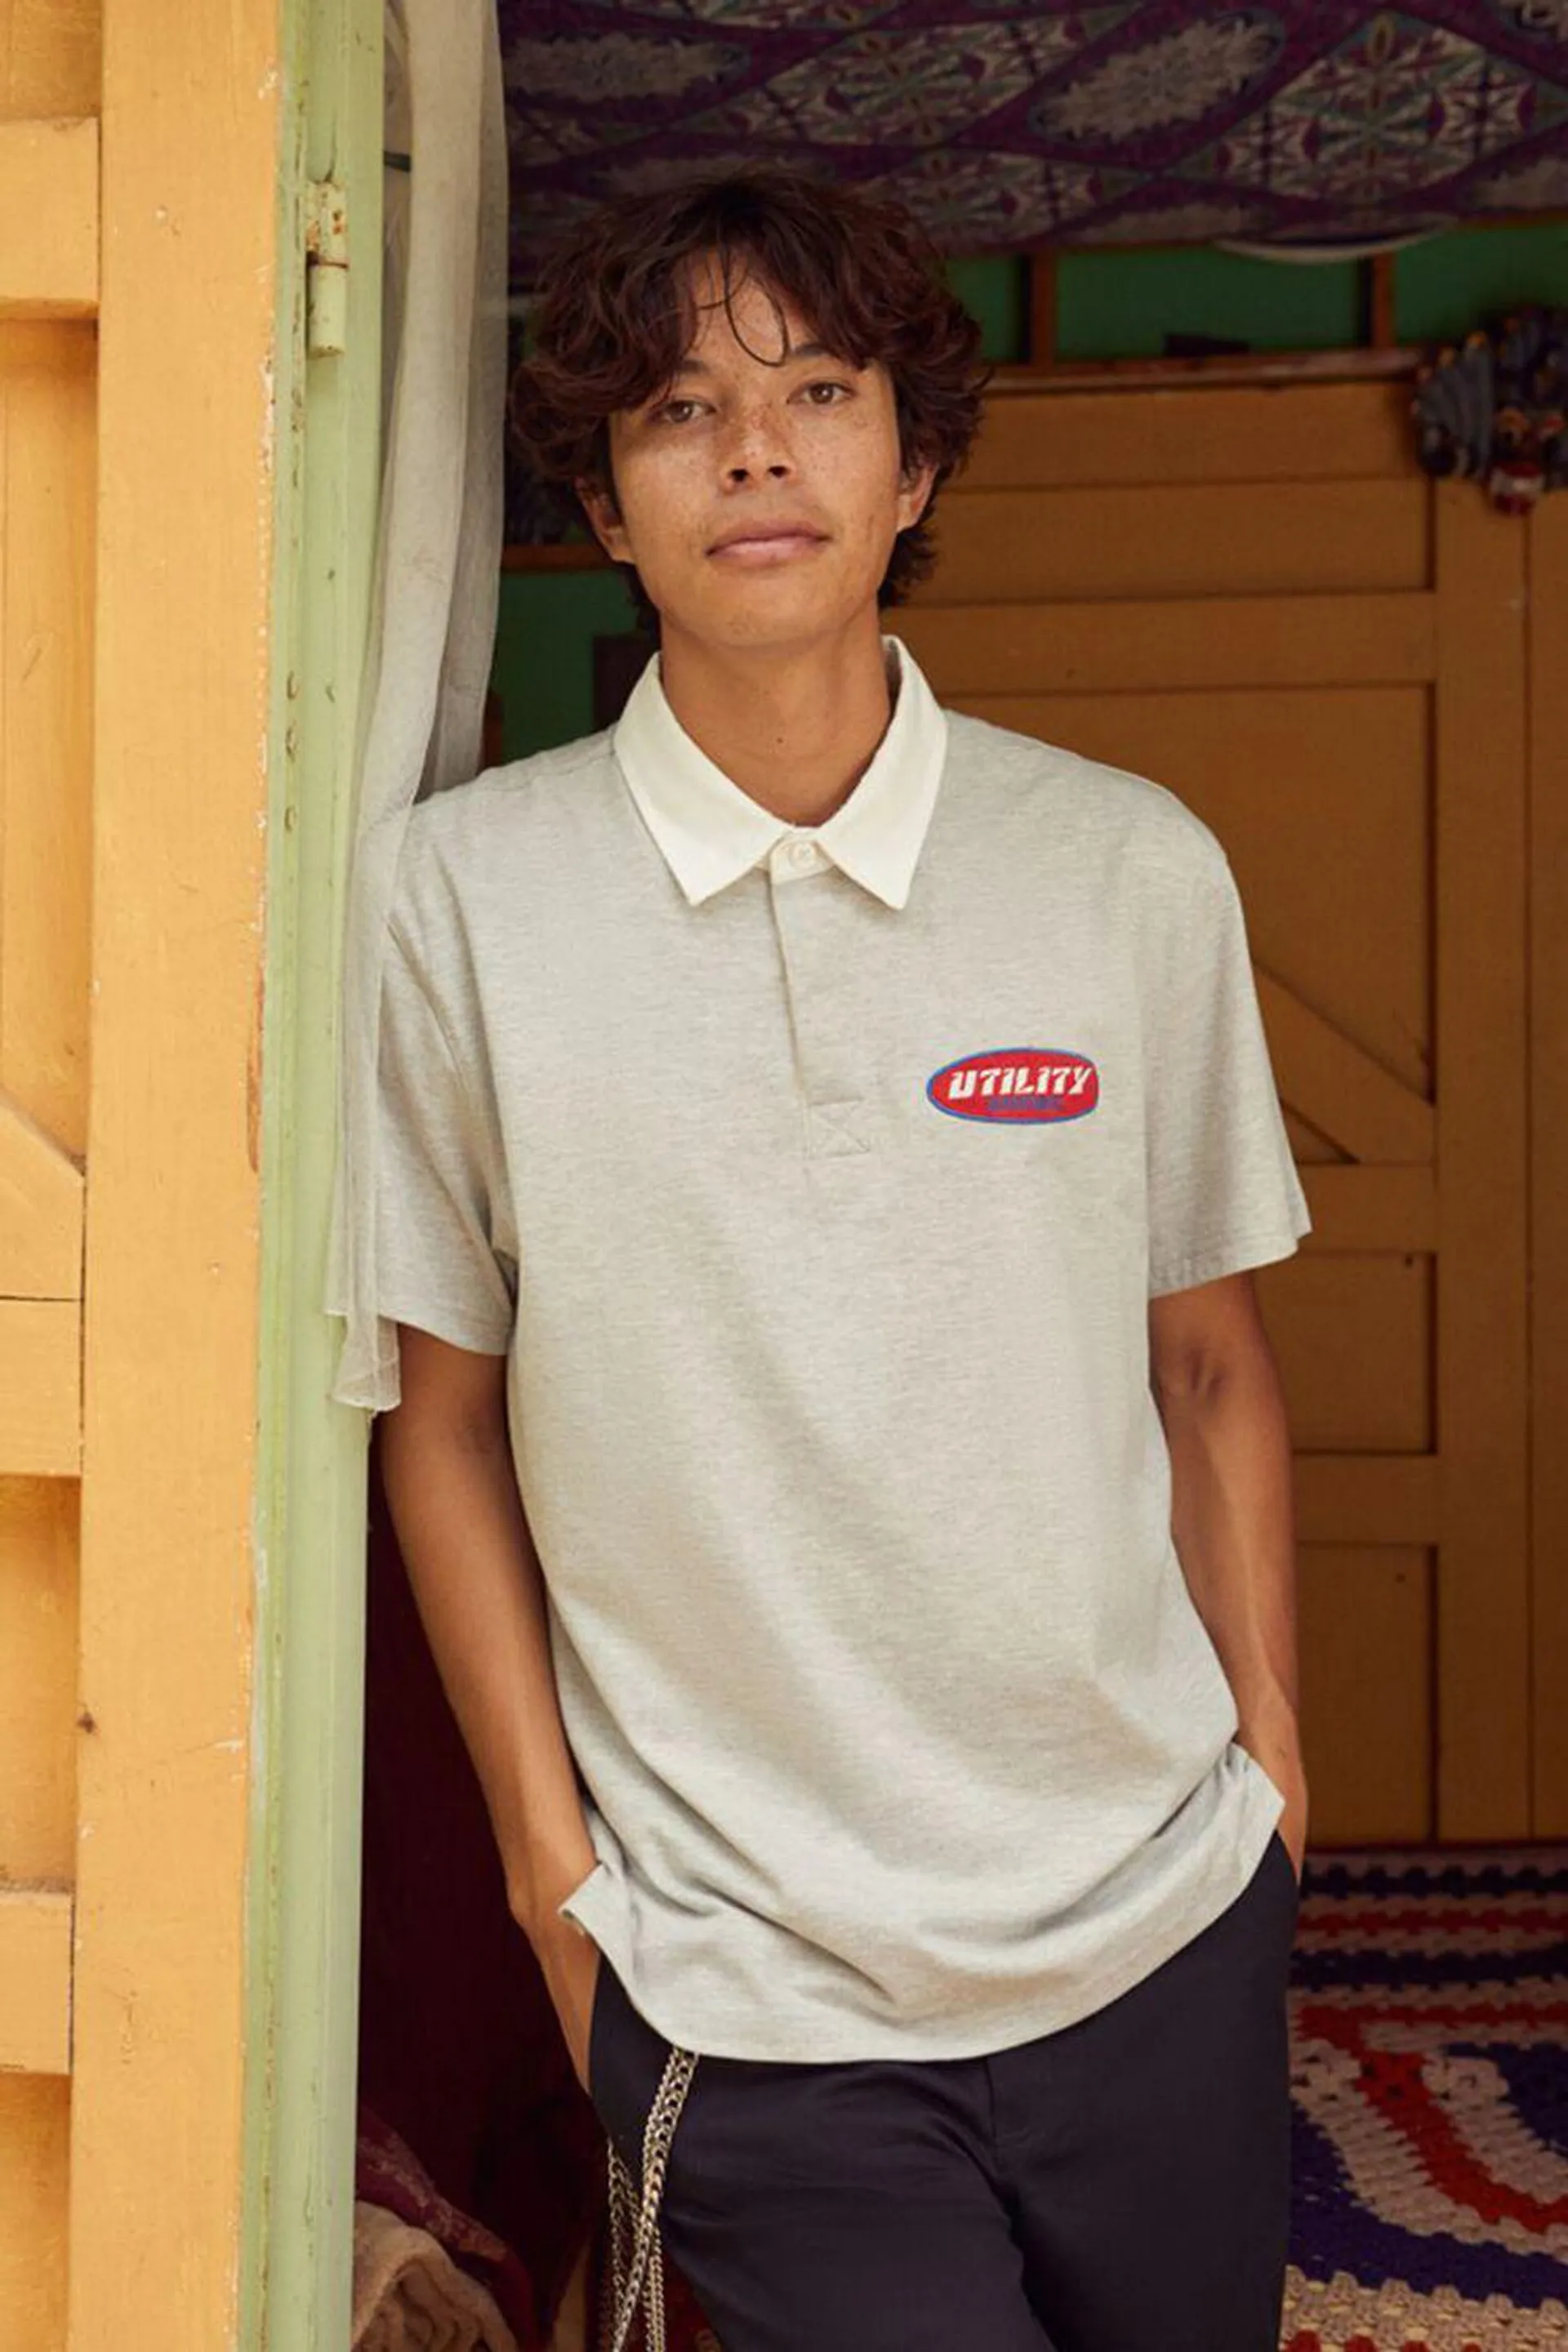 Utility Department Patch Polo Shirt